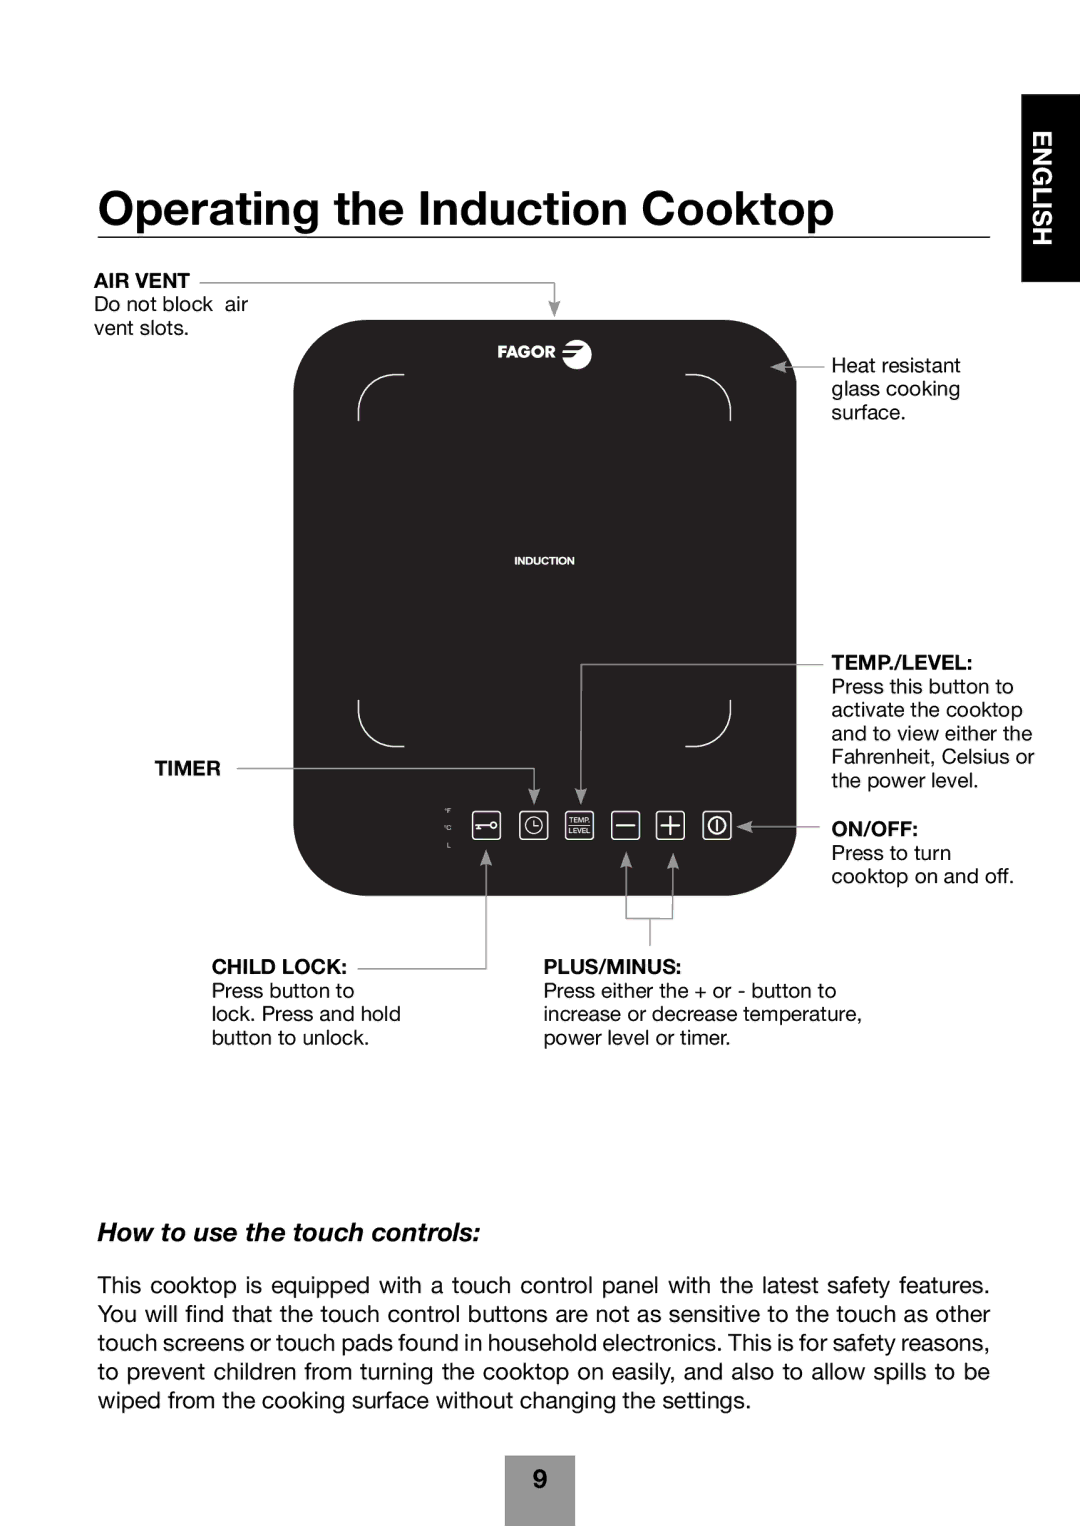 Fagor America 670041860 user manual Operating the Induction Cooktop, How to use the touch controls 